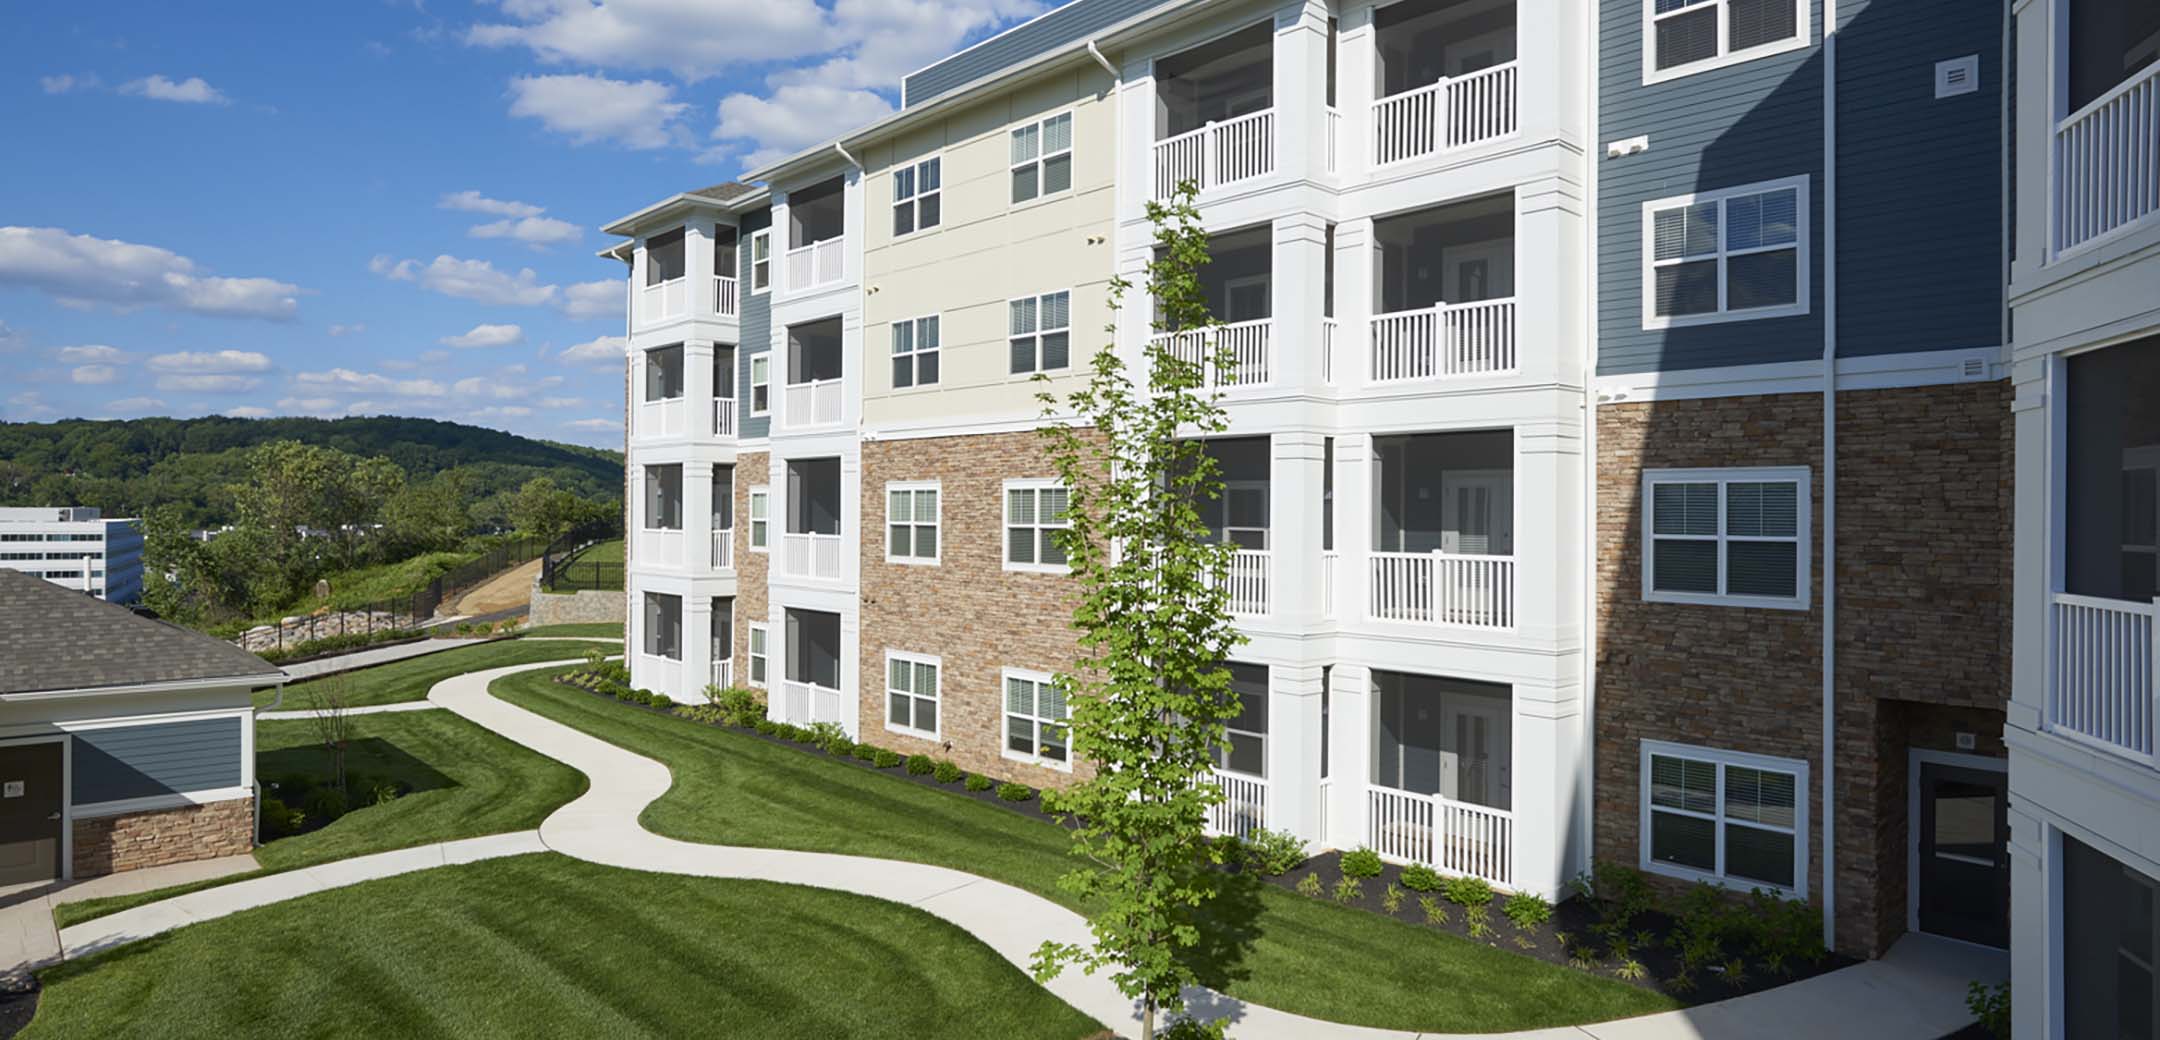 An angled view of the Haven building back courtyard showcasing the apartment balconies and paved grass pathways.